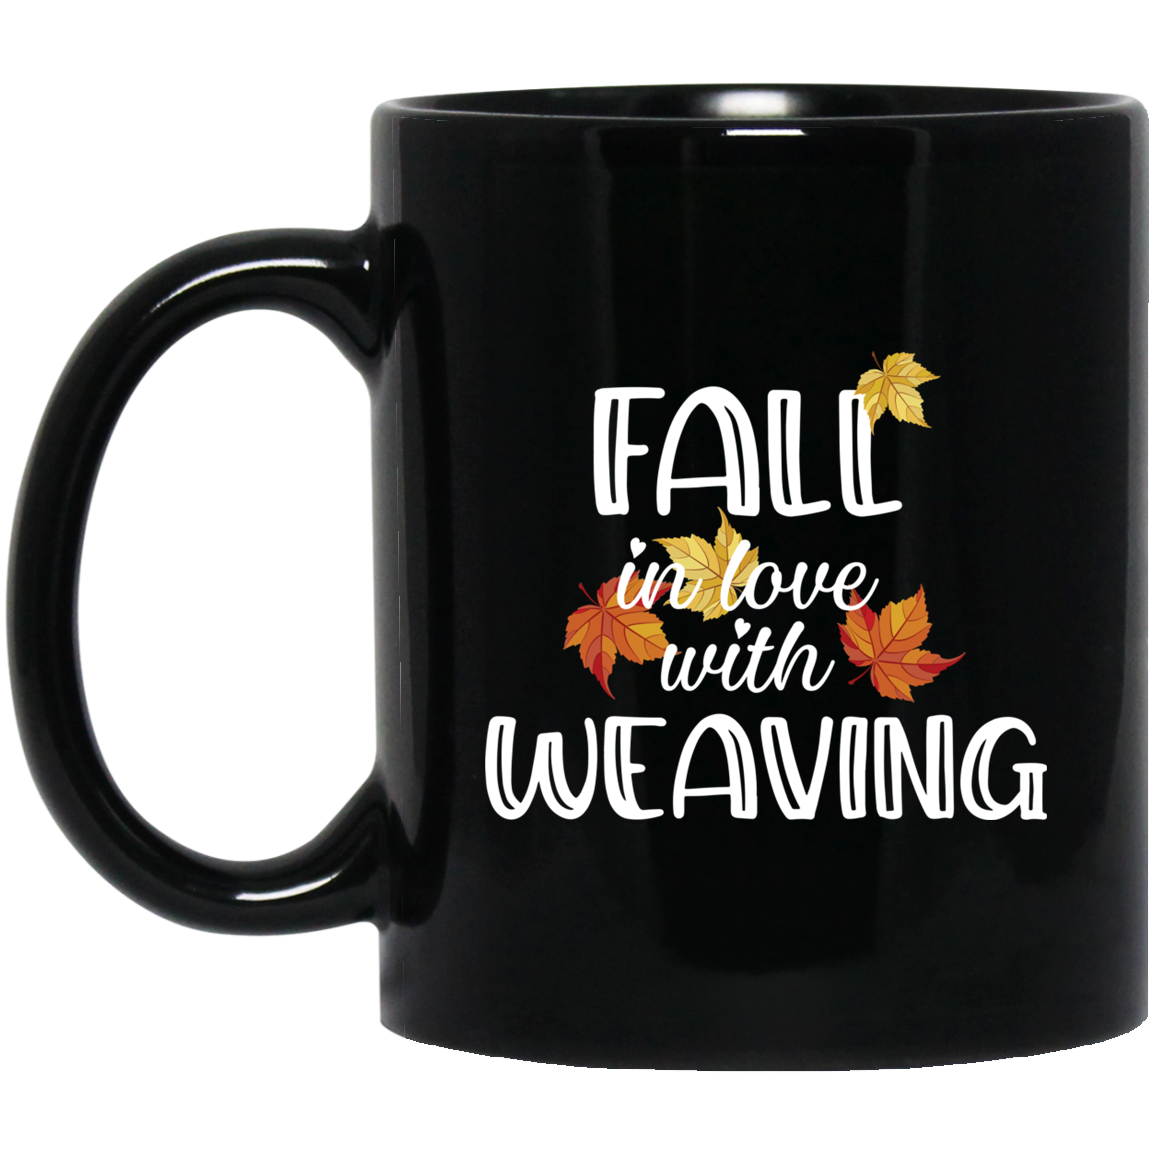 Fall in Love with Weaving Black Mugs